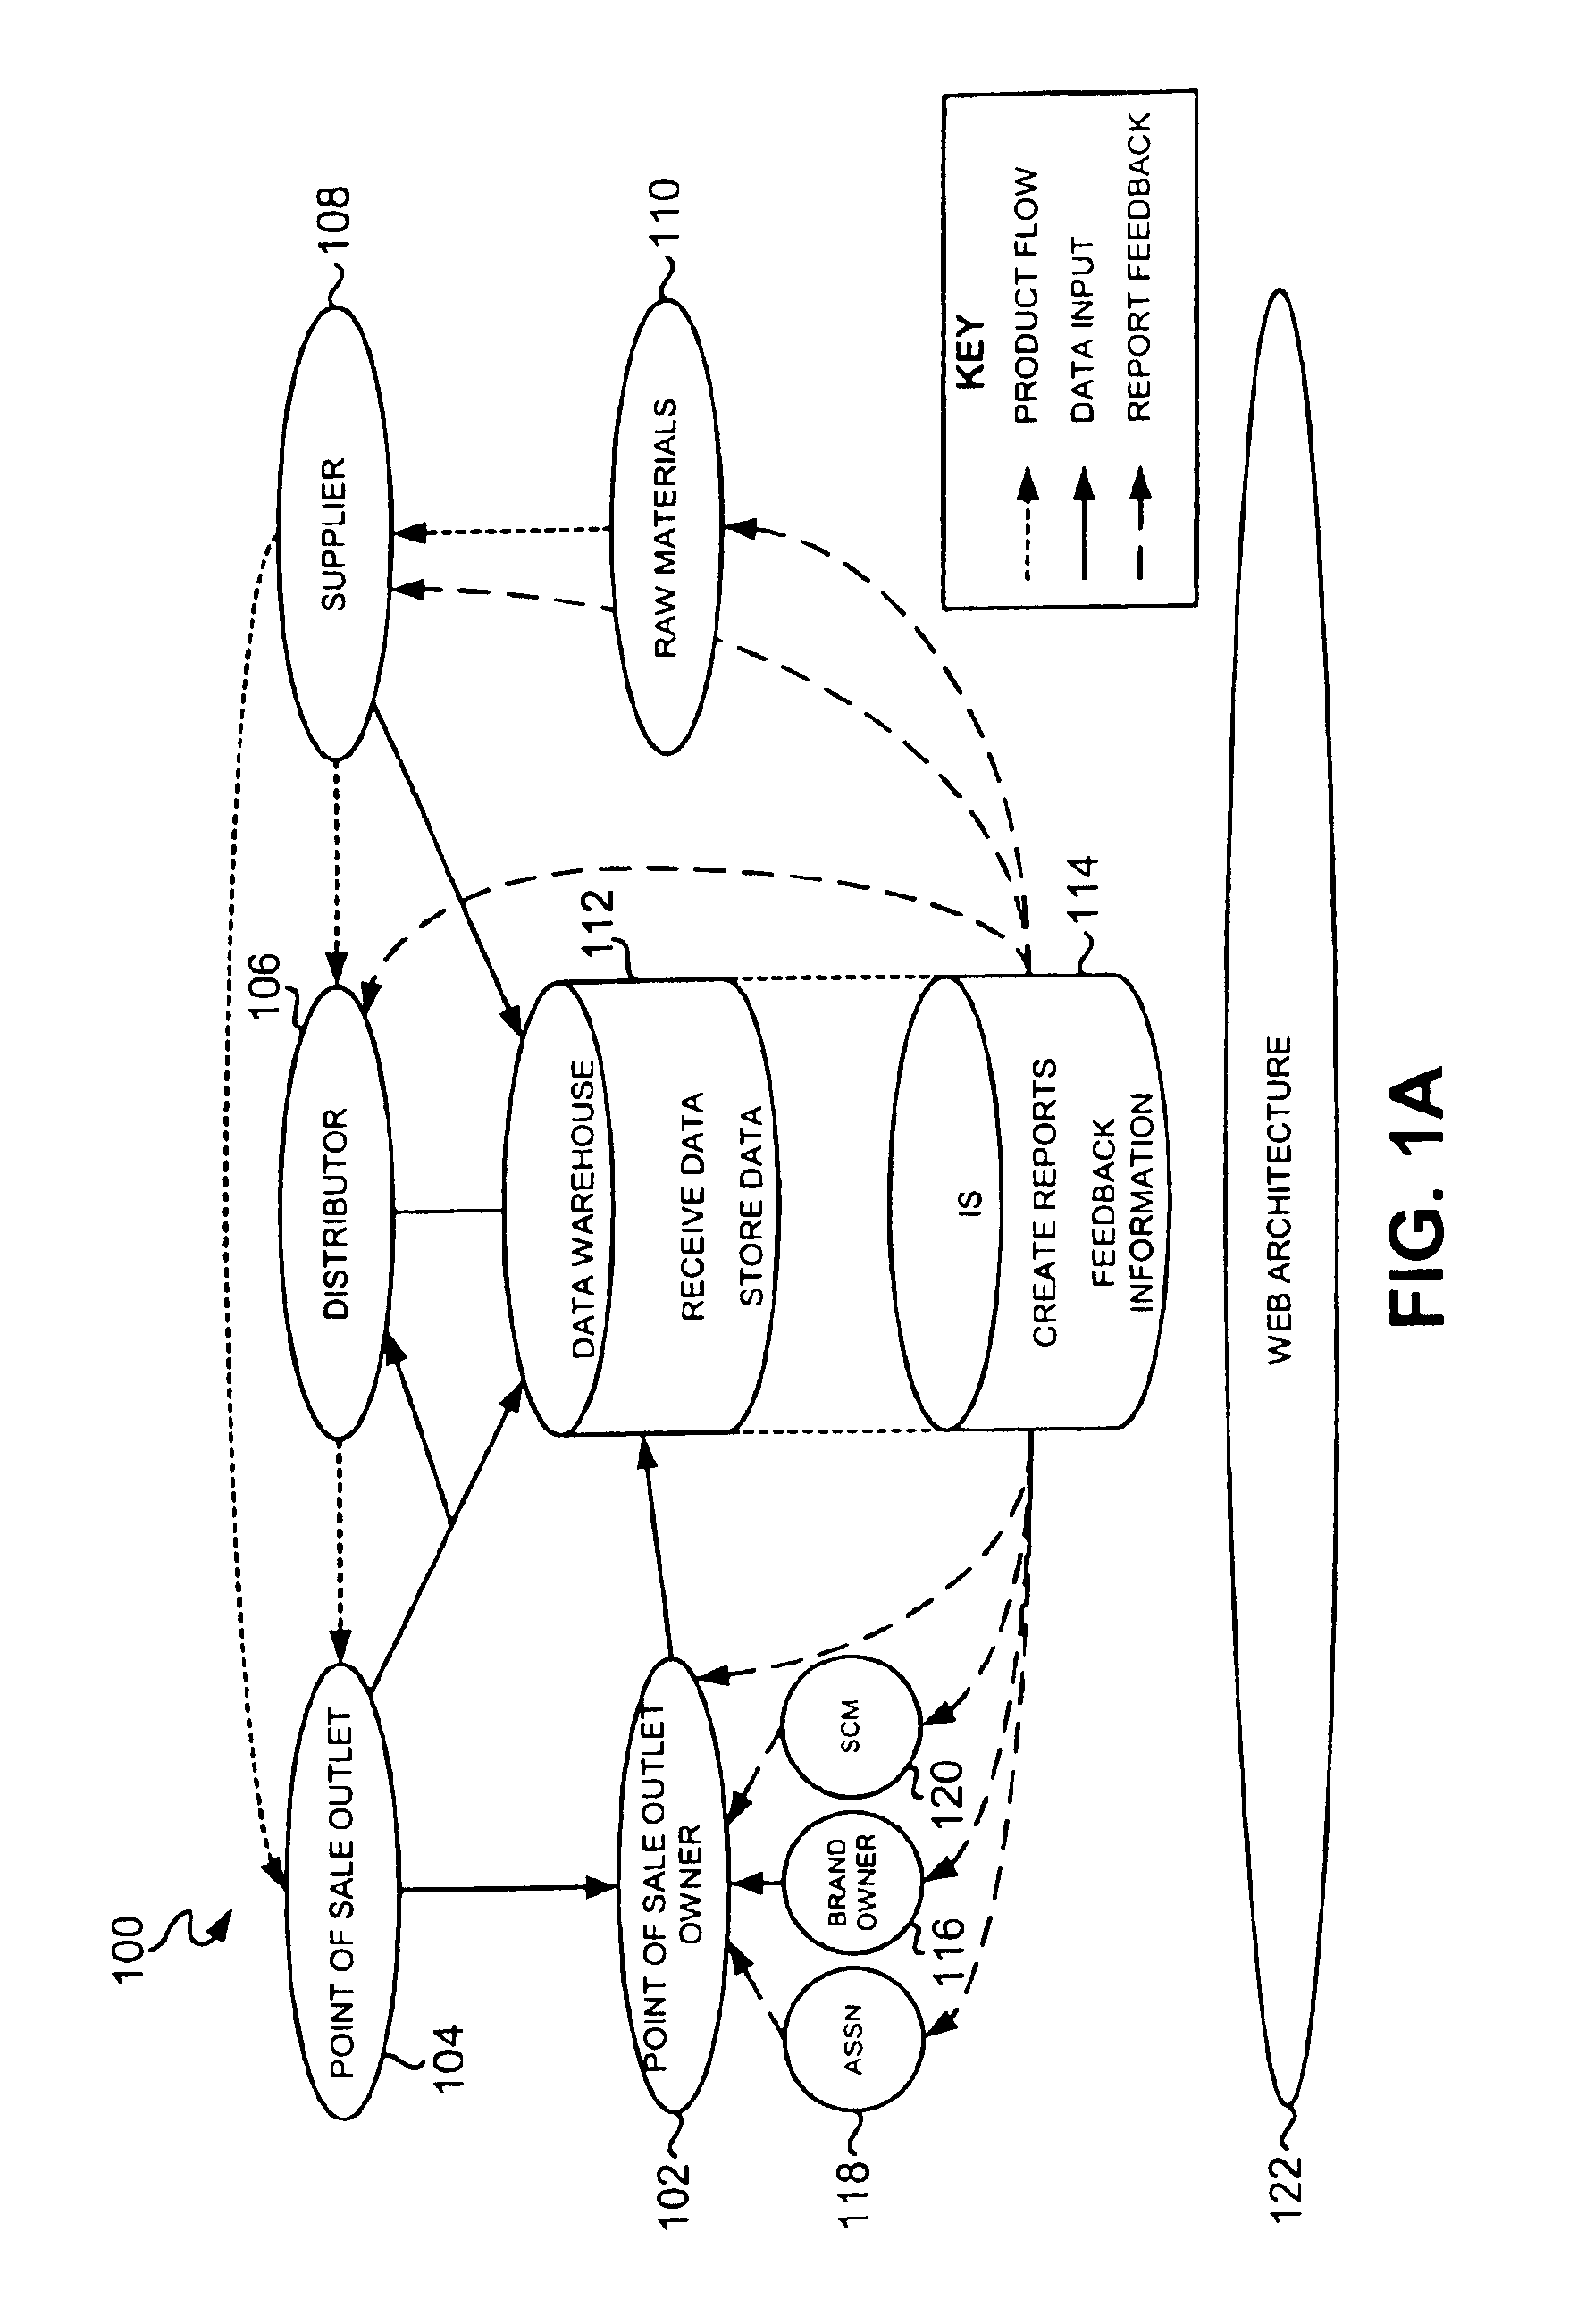 System, method and computer program product for contract consistency in a supply chain management framework